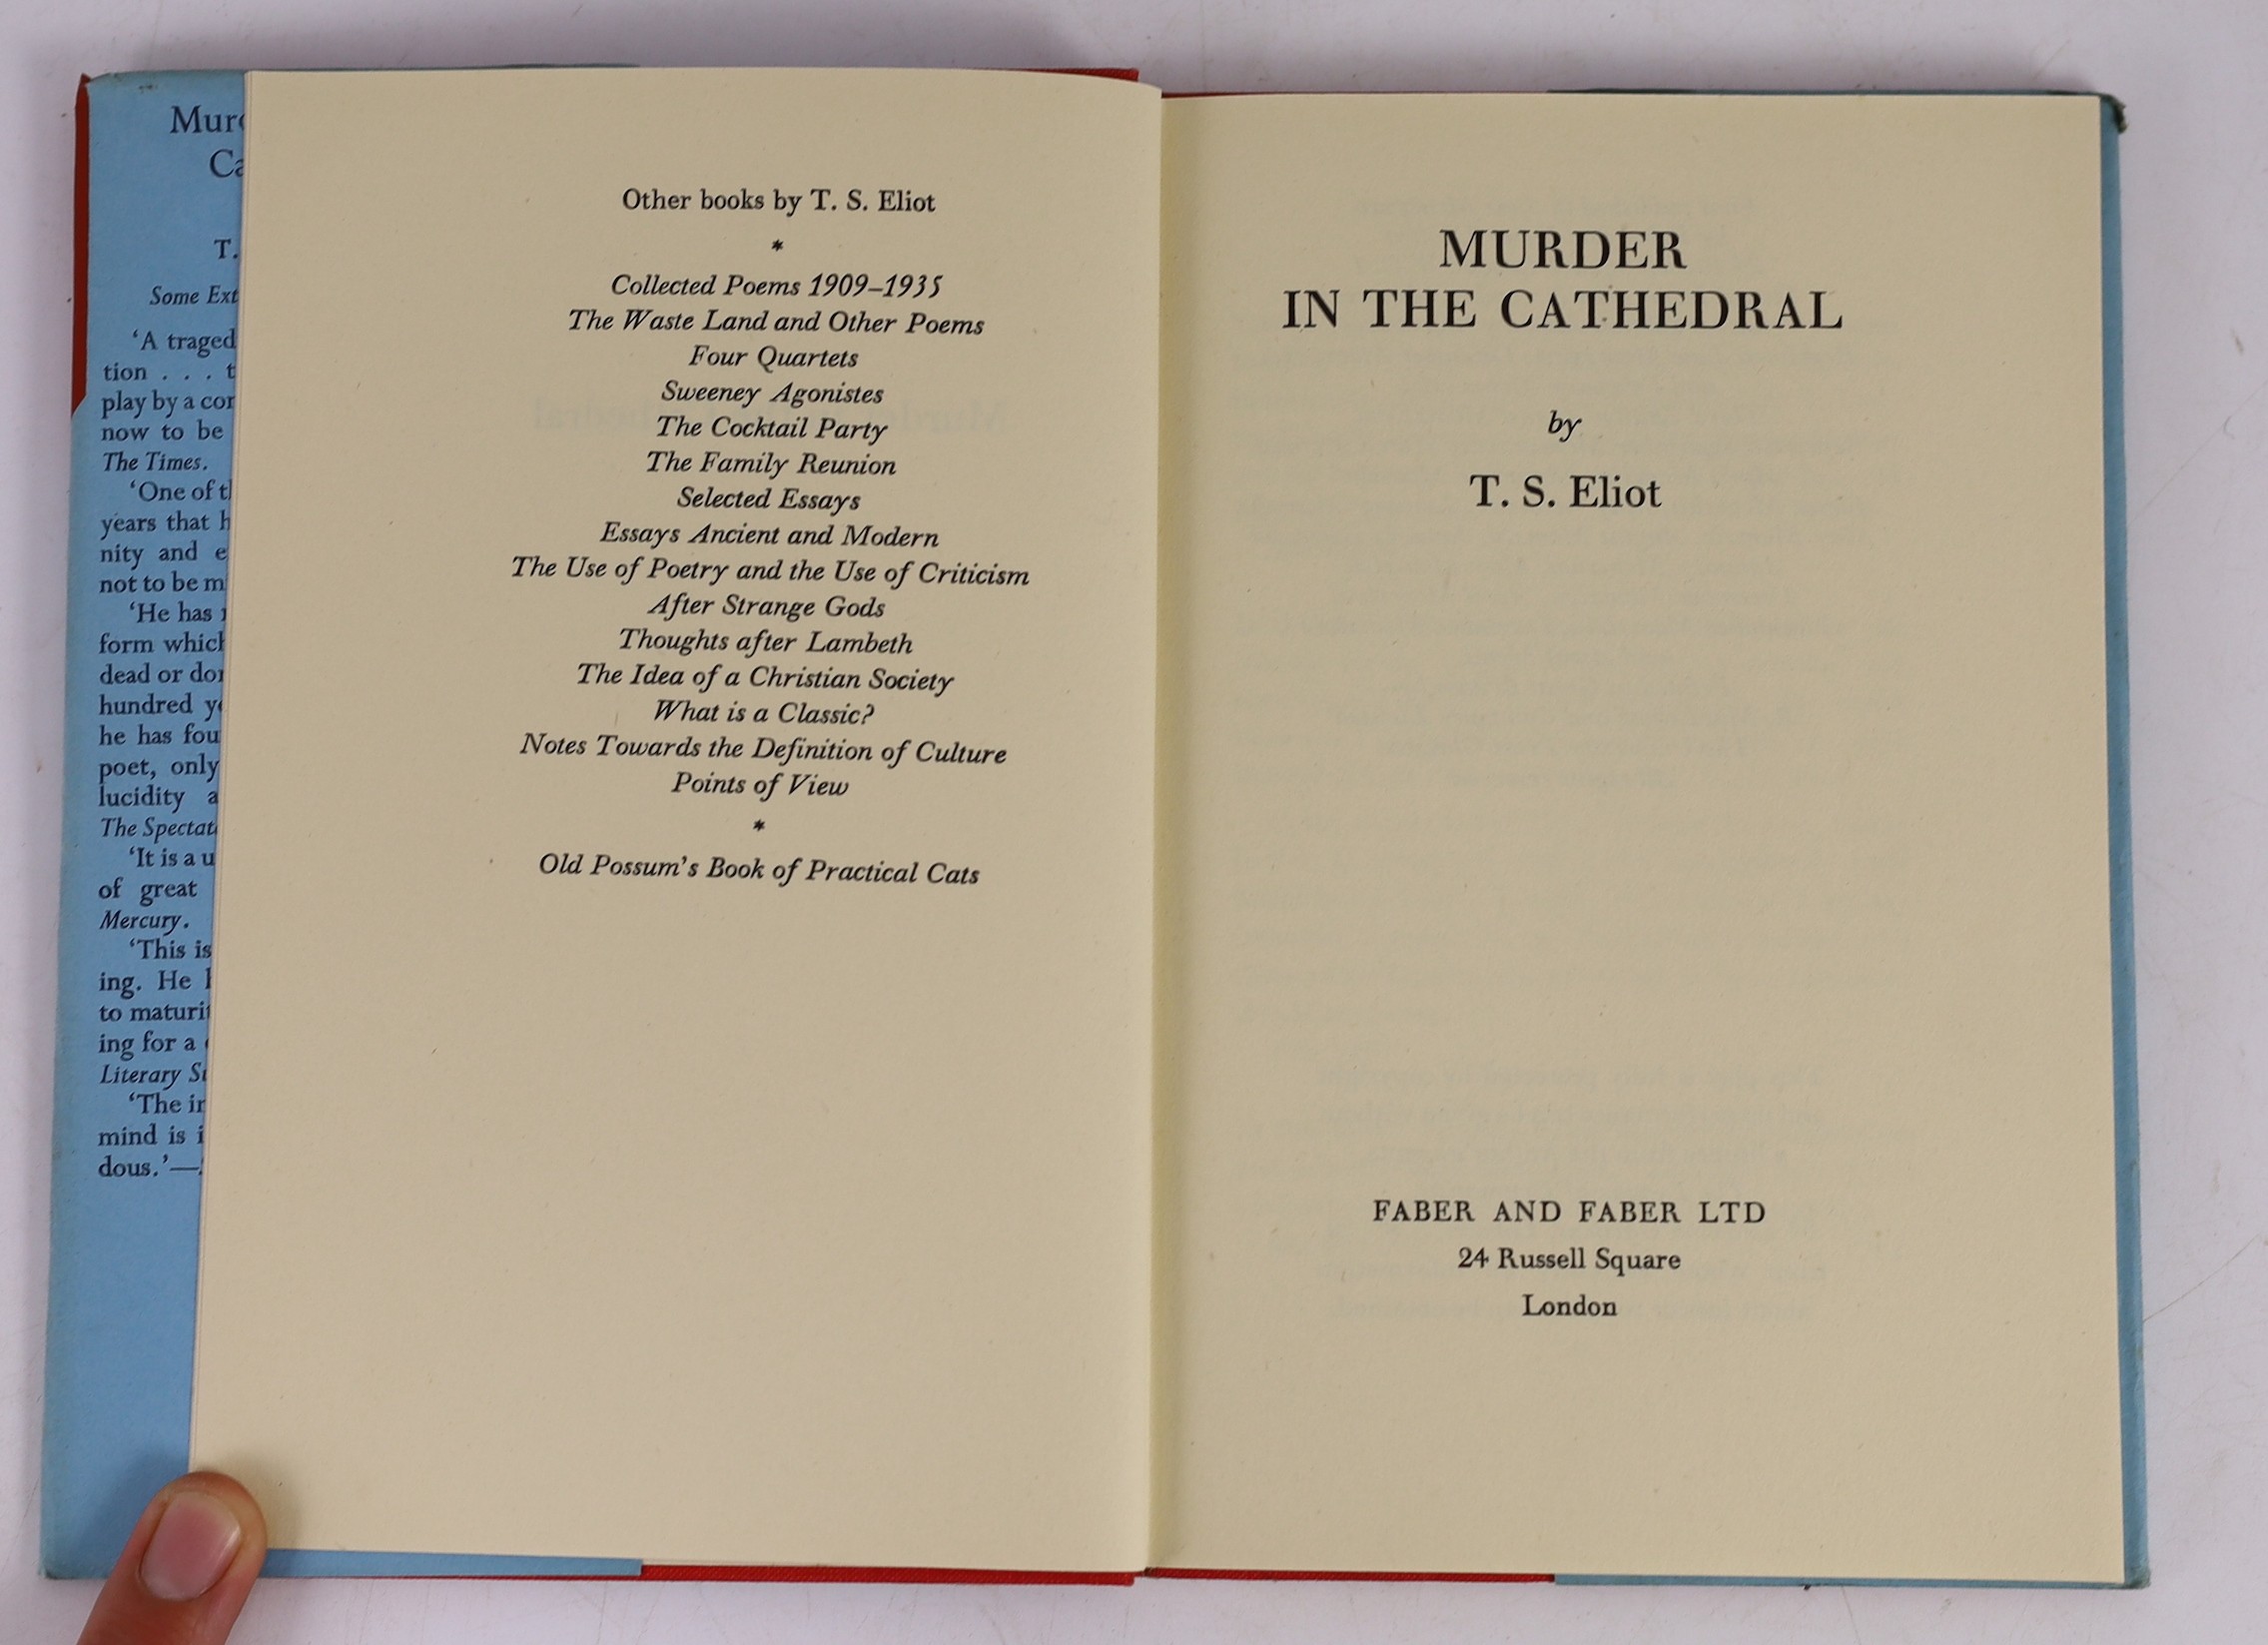 Brecht, Bertolt - Plays, vol. 1, 8vo, cloth with unclipped d/j, Glasgow, 1965 and Eliot, T.S - Murder in the Cathedral, 4th edition, 8vo, cloth with unclipped d/j, Faber and Faber, London, 1950 (2)